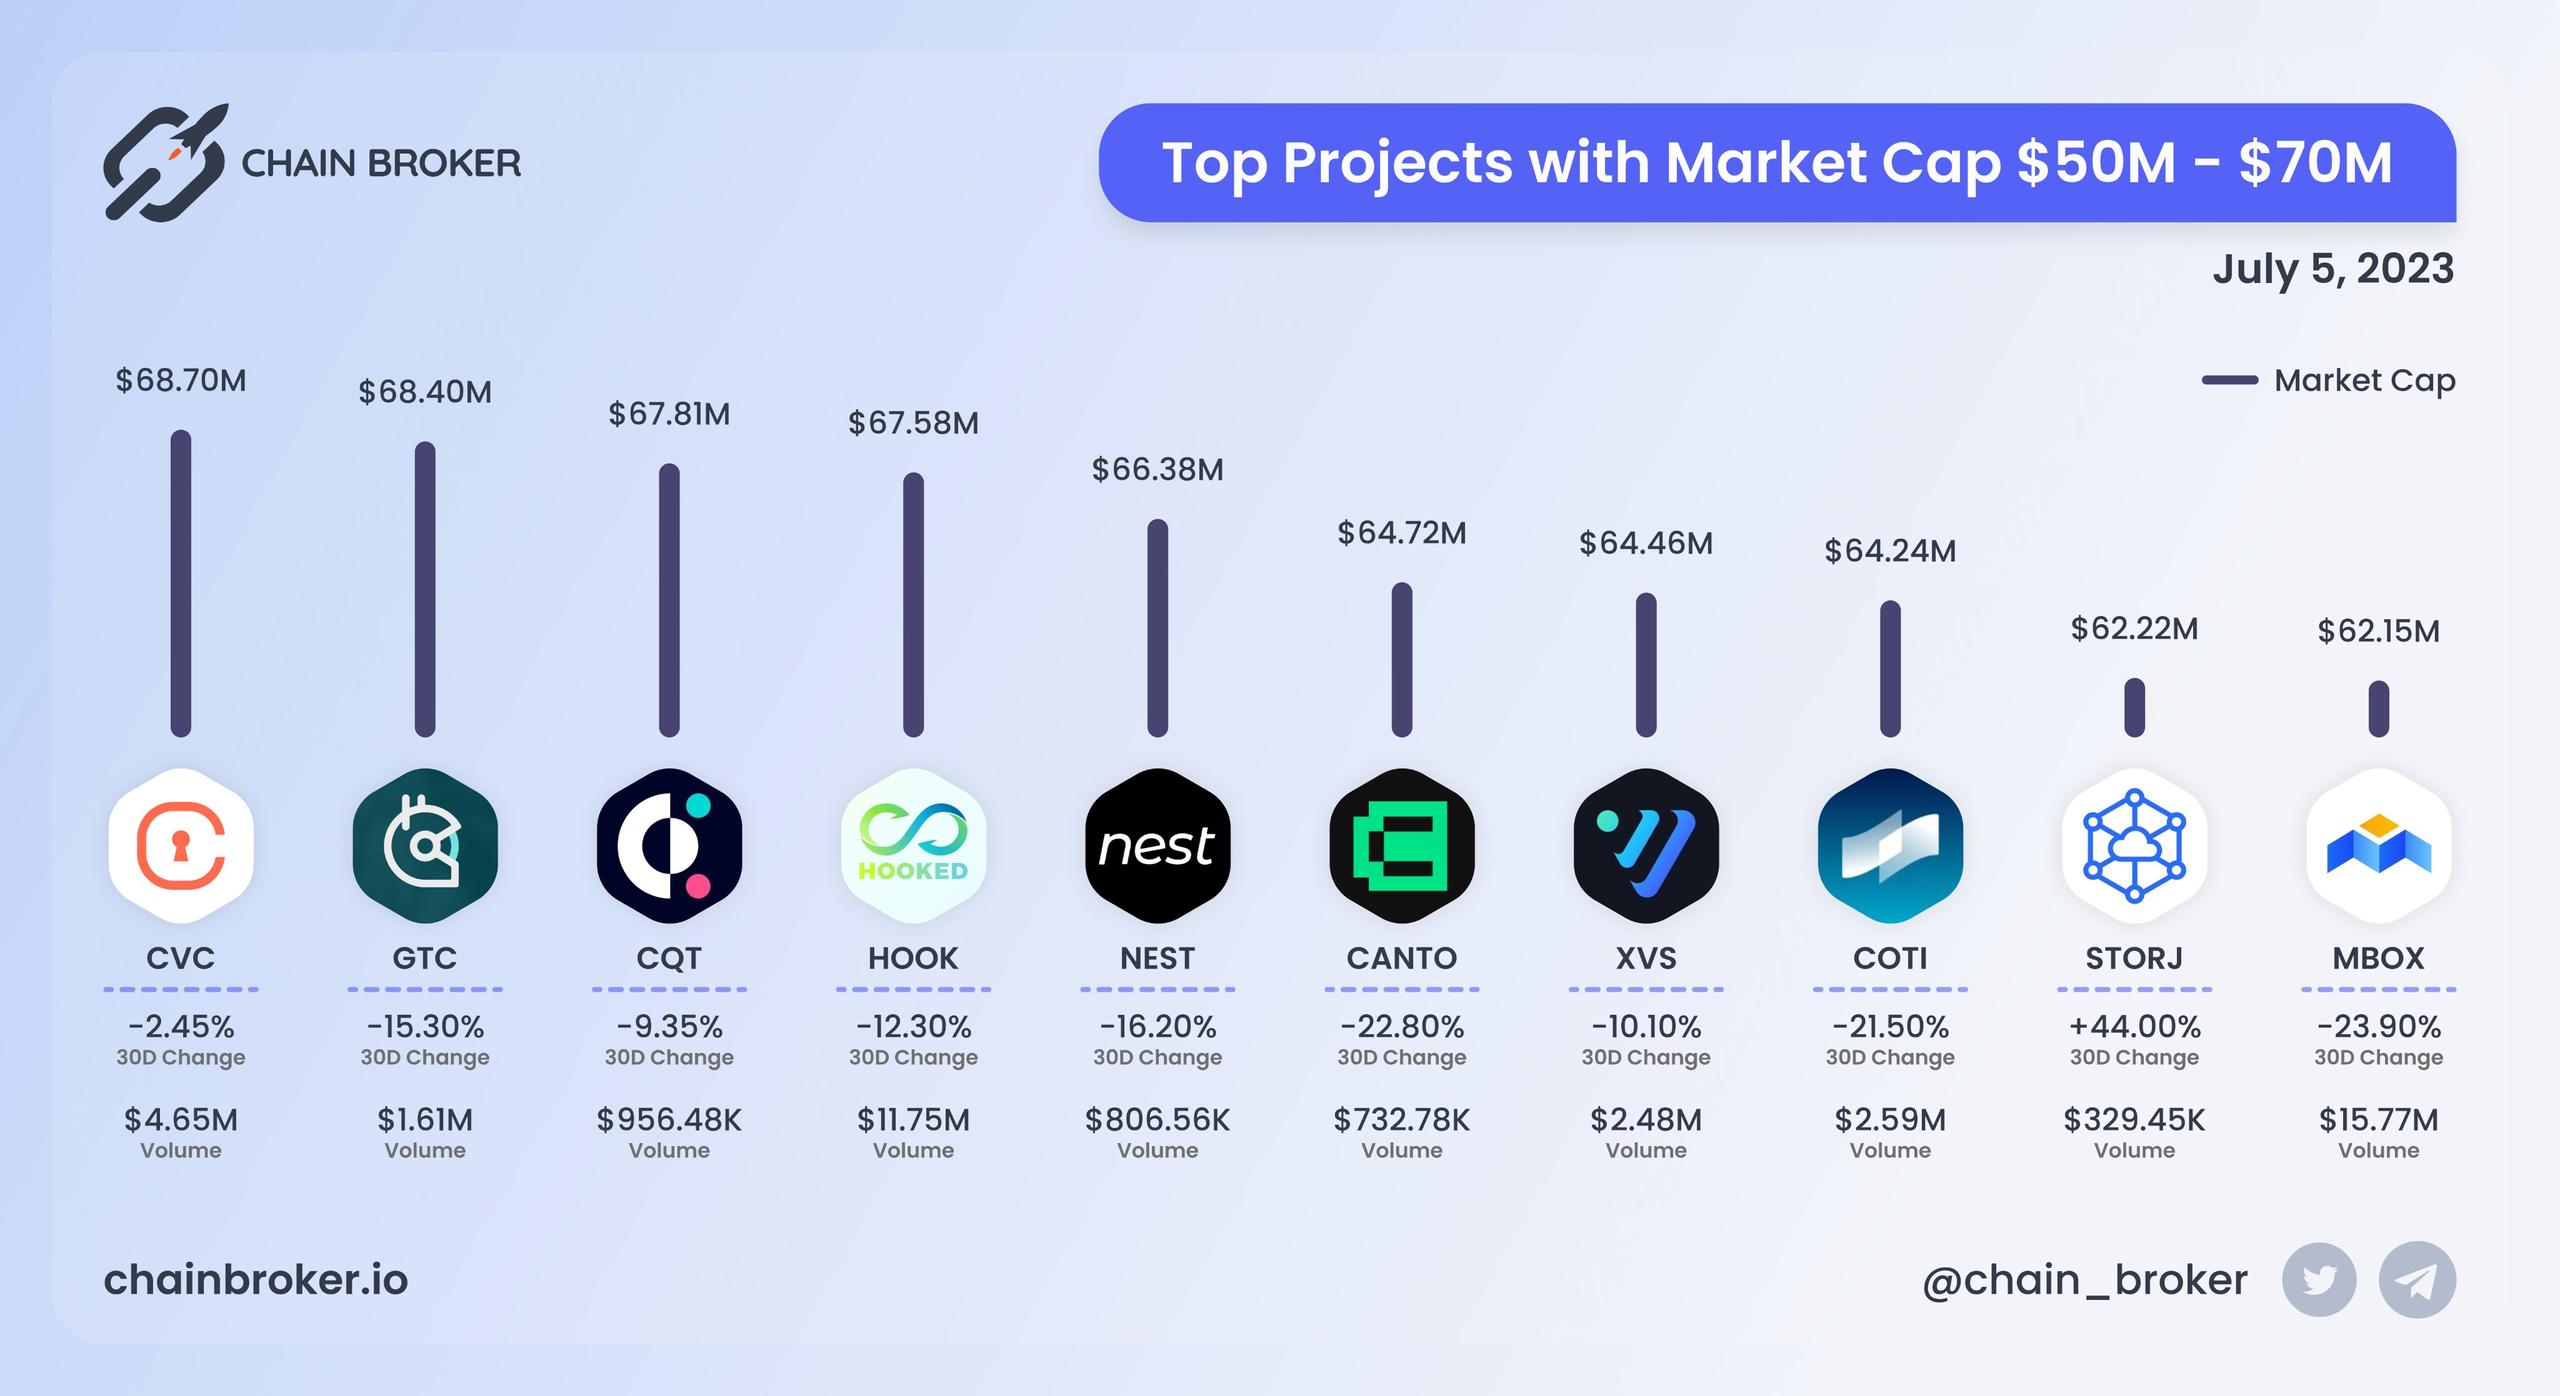 Top projects with Market Cap $50M - $70M